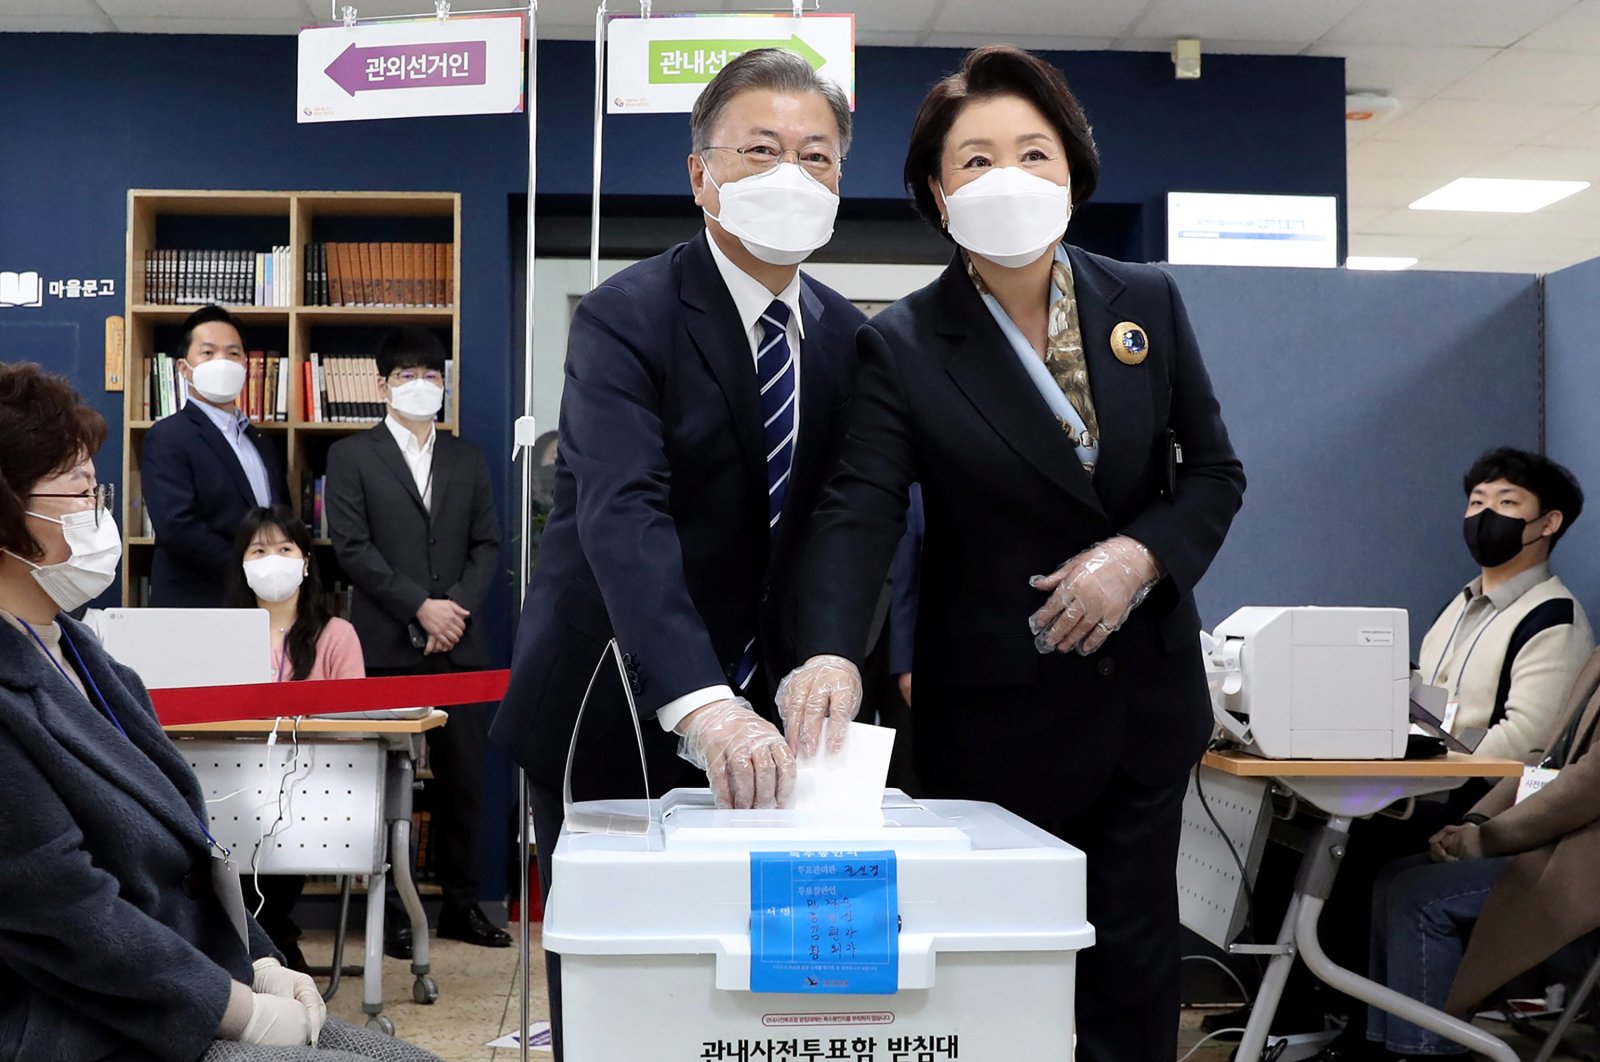 South Korean President Moon Jae-in and first lady Kim Jung-sook cast their early vote for the March 9 presidential election, at a polling station in Seoul, South Korea, March 4, 2022.  (Reuters Photo)